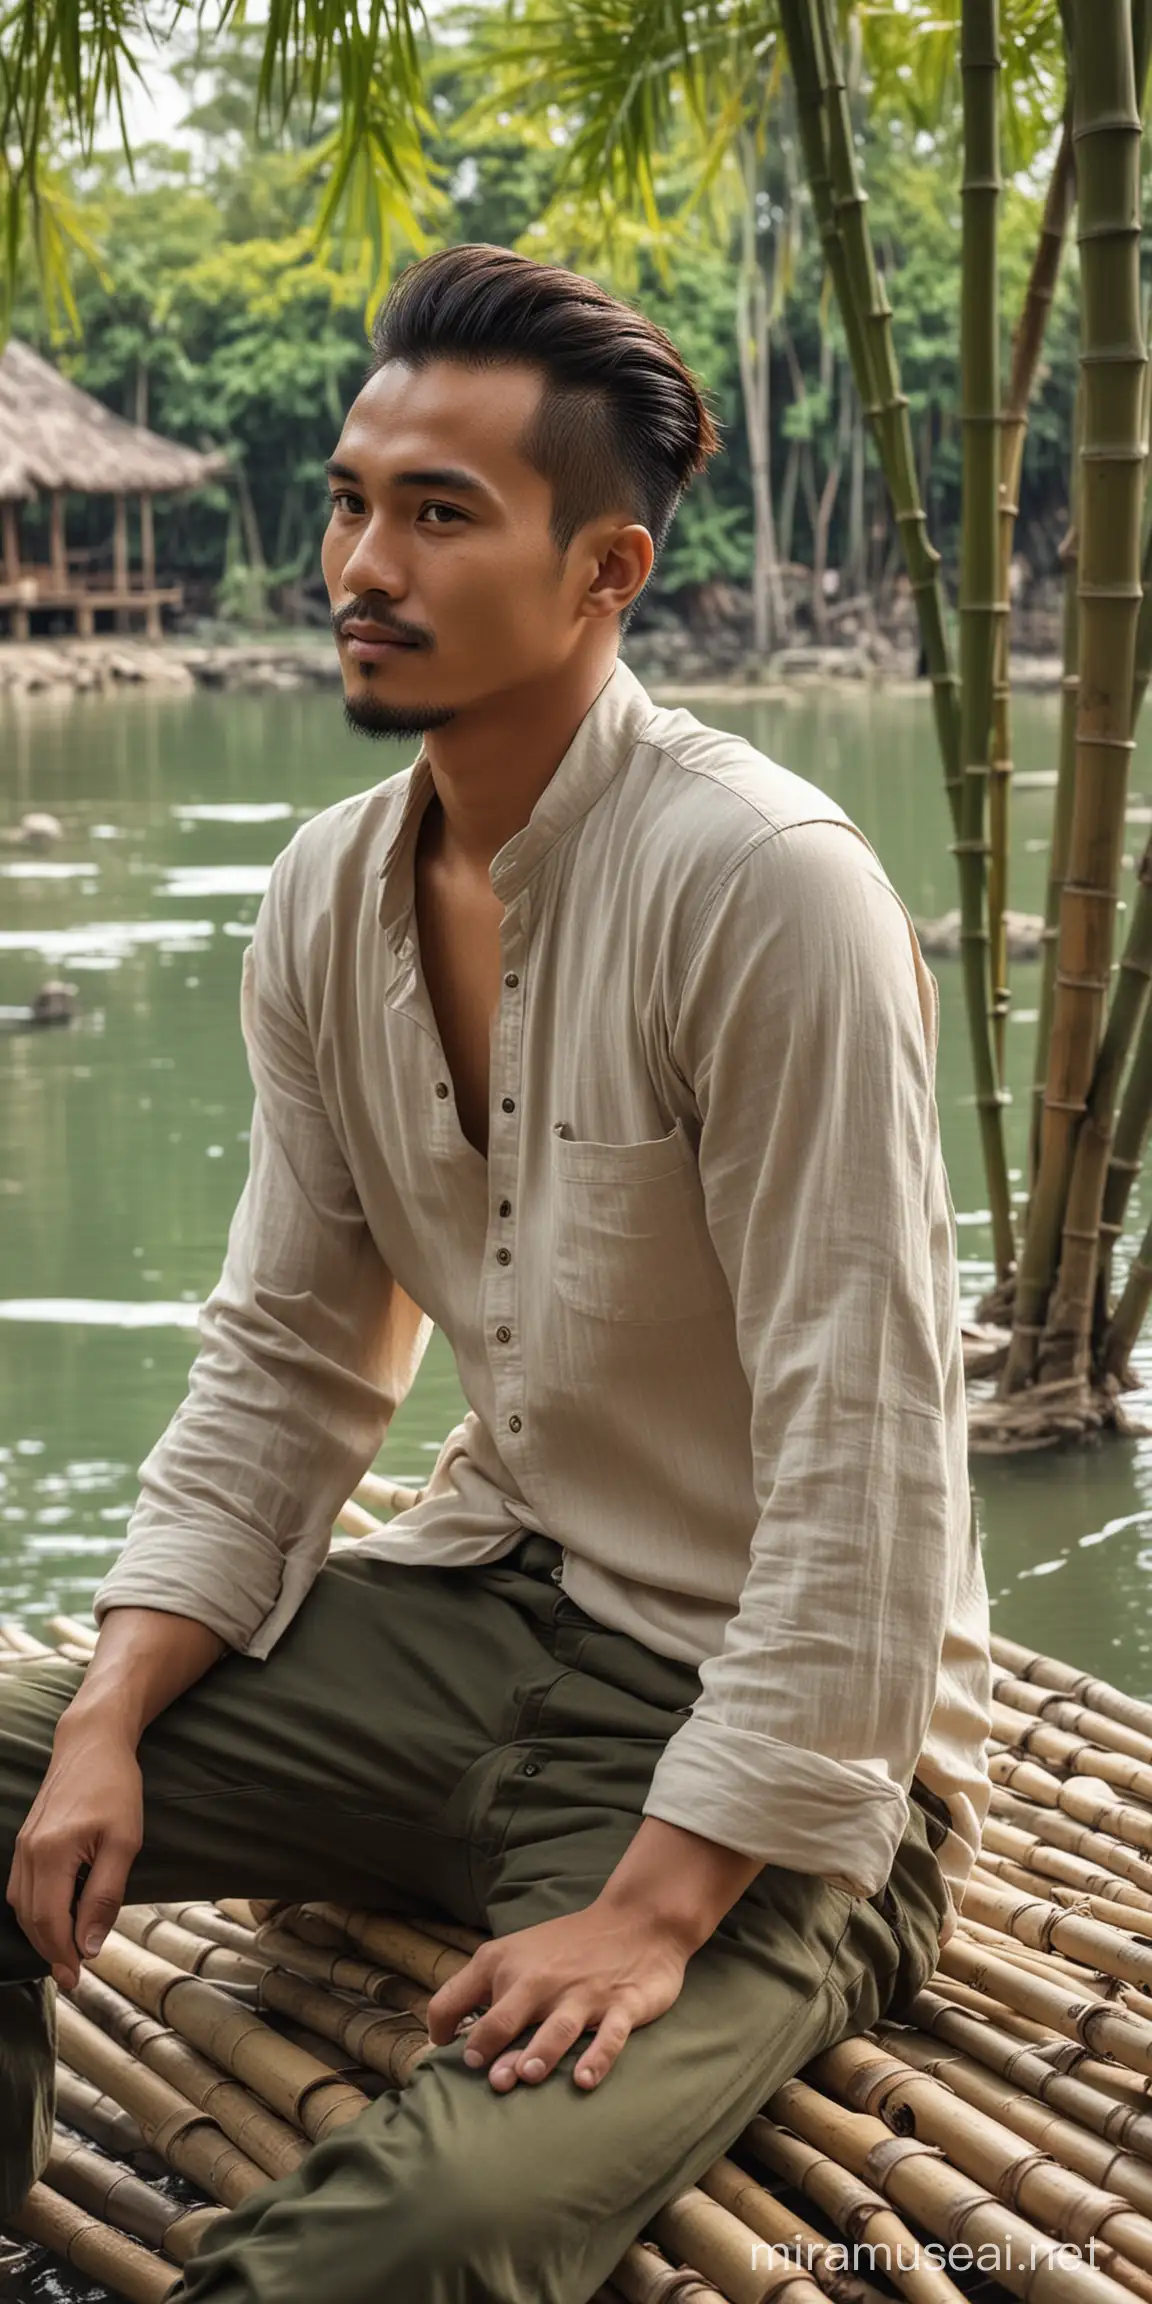 Indonesian Man Relaxing in Bamboo Hut by the Lake